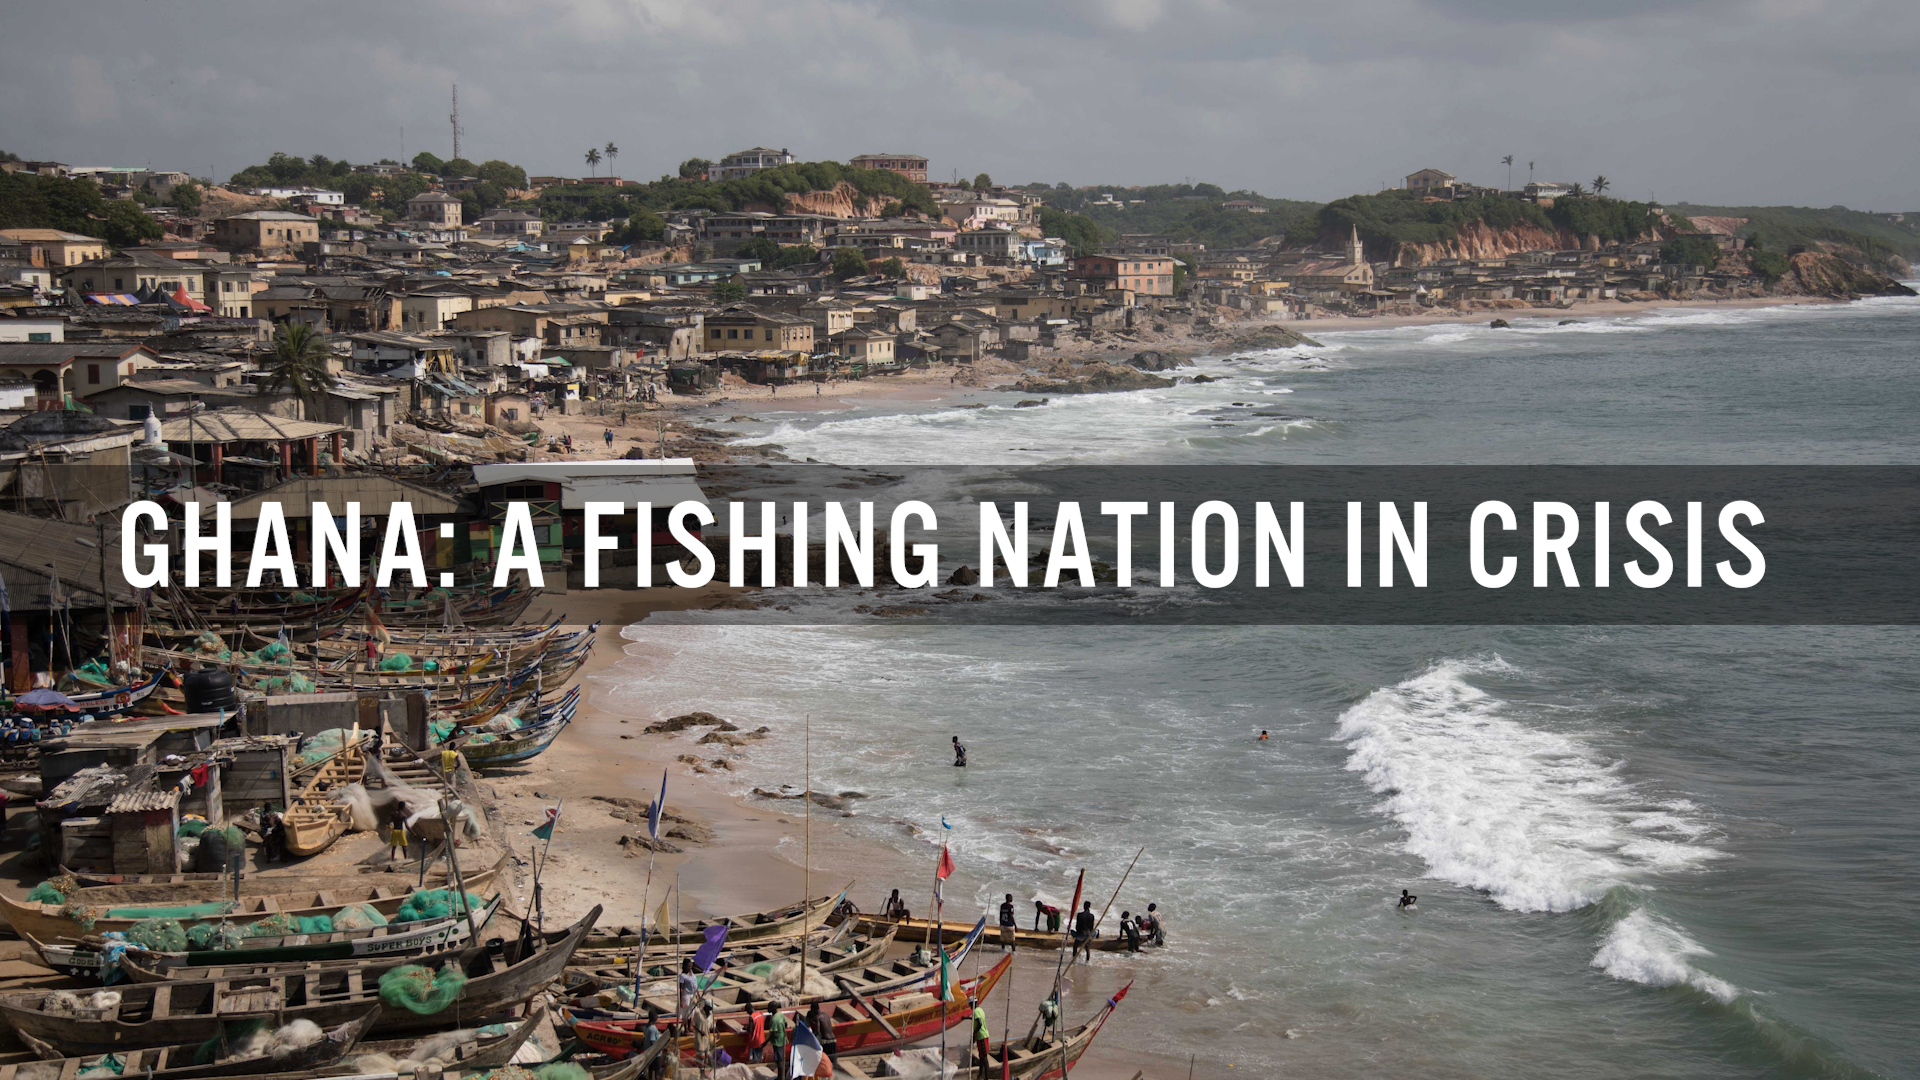 Ghana: A Fishing Nation in Crisis